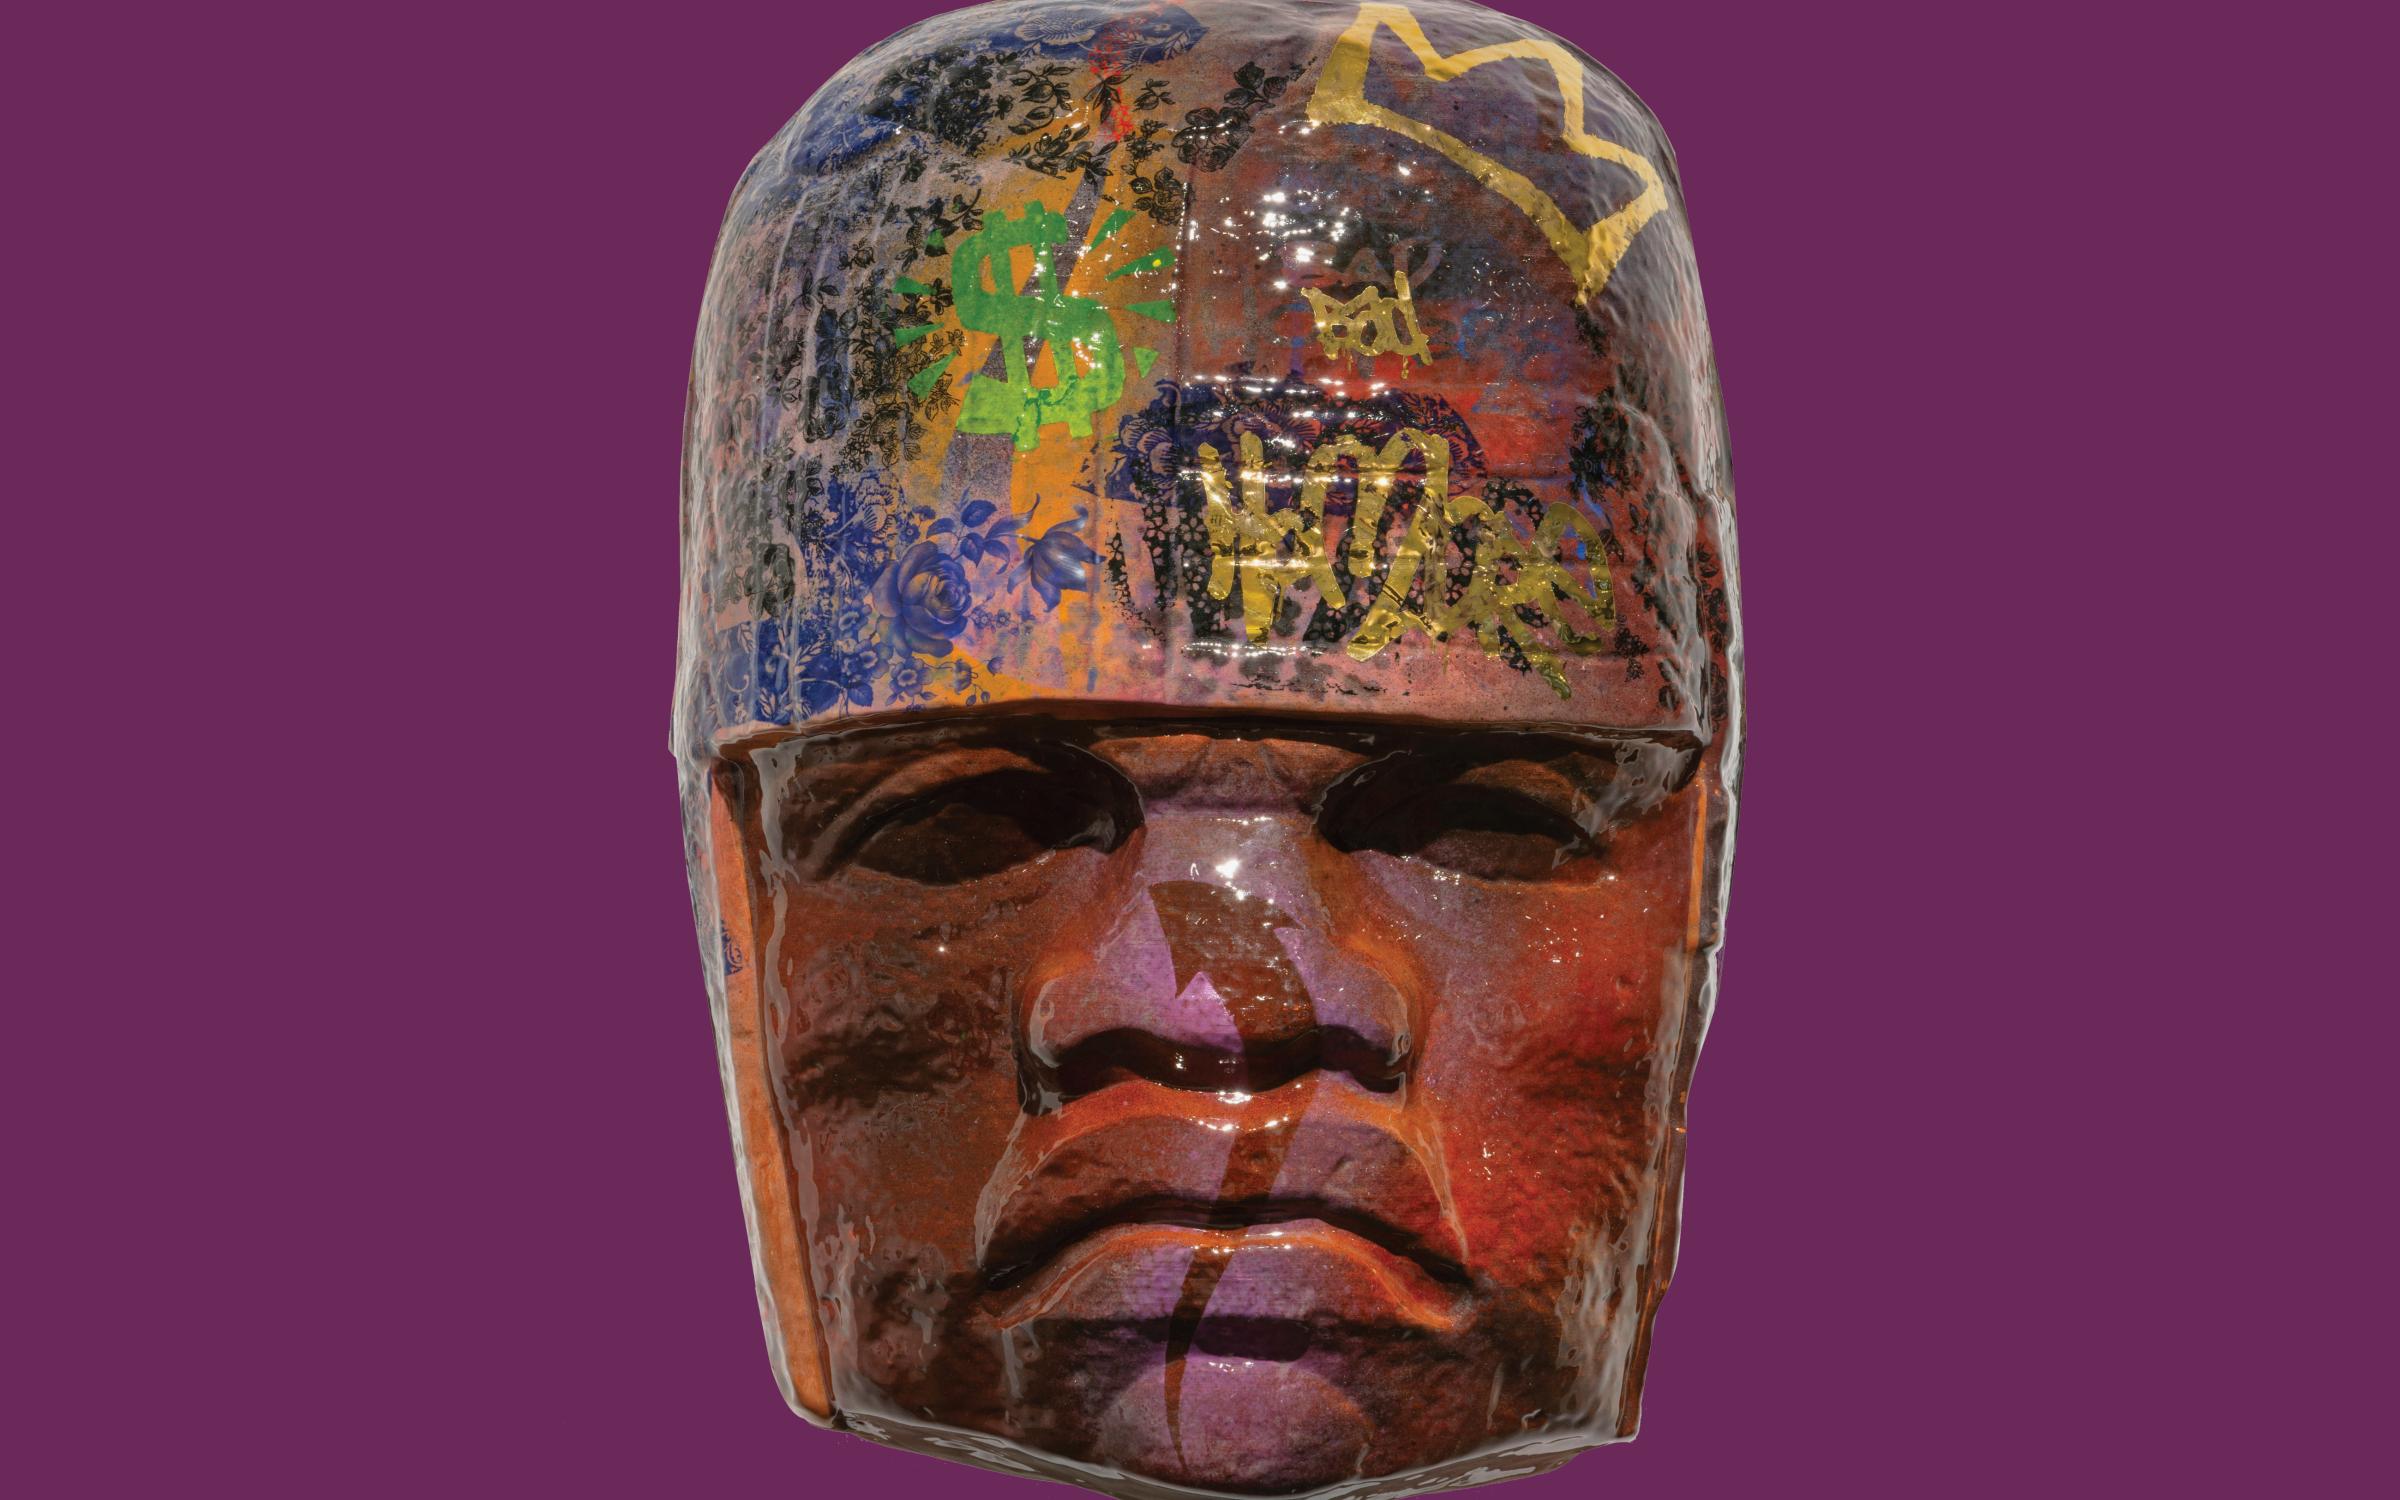 Large Mesoamerican sculpture of a head with graffiti on it.